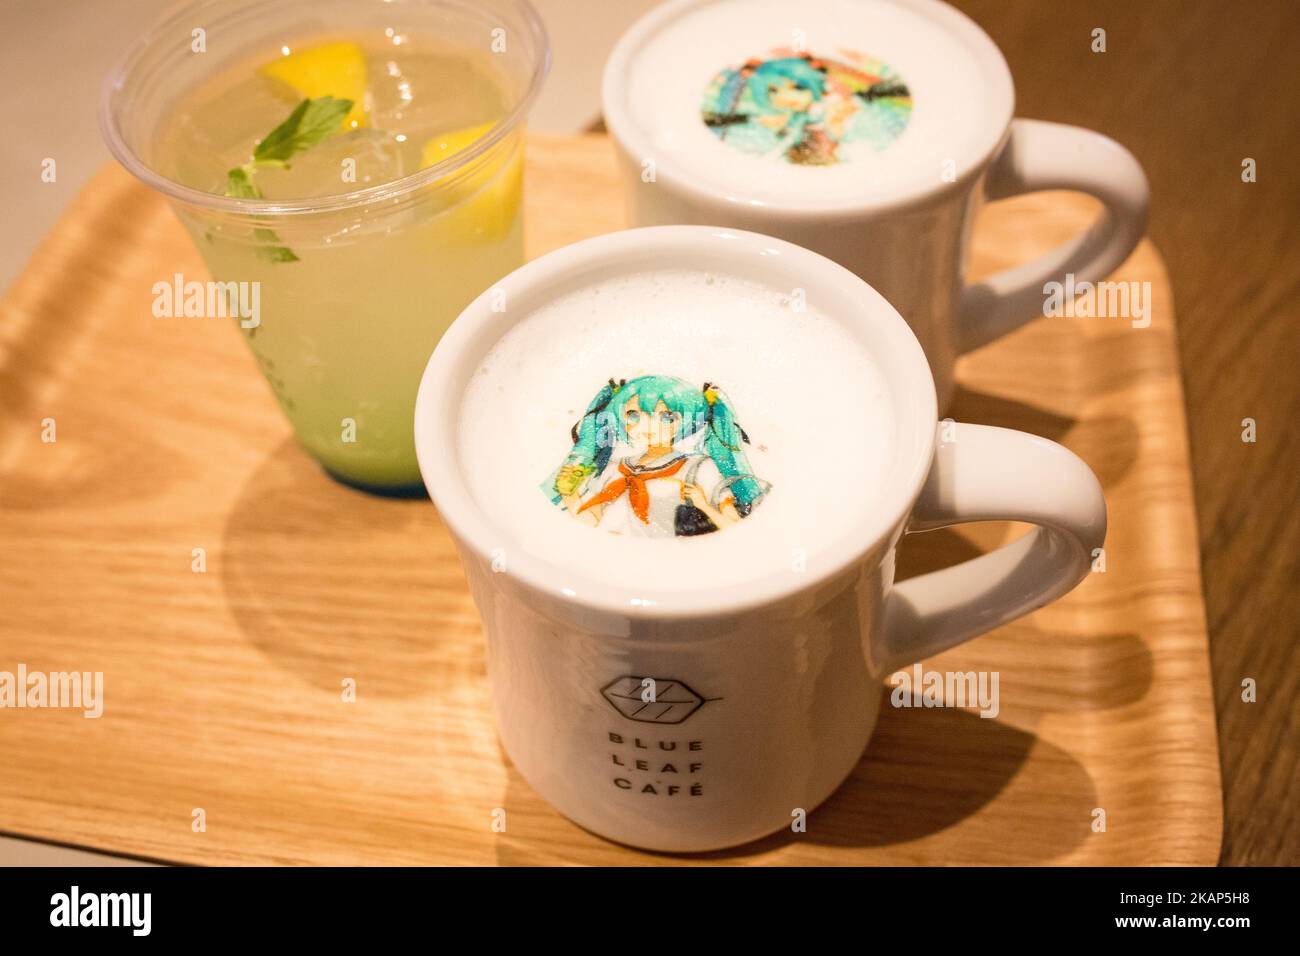 SENDAI, JAPAN - JULY 8: A special menu, Miku's latte is seen during augmented reality (AR) event in Sendai, Japan on July 8, 2017. As part of a promotion with telecommunications provider au/KDDI, Crypton Future Media and Blue Leaf Cafe operator, guest can enjoy dining with a special menu with their Vocaloid superstarIdol Hatsune Miku several days. (Photo by Richard Atrero de Guzman/NUR Photo) (Photo by Richard Atrero de Guzman/NurPhoto) *** Please Use Credit from Credit Field *** Stock Photo